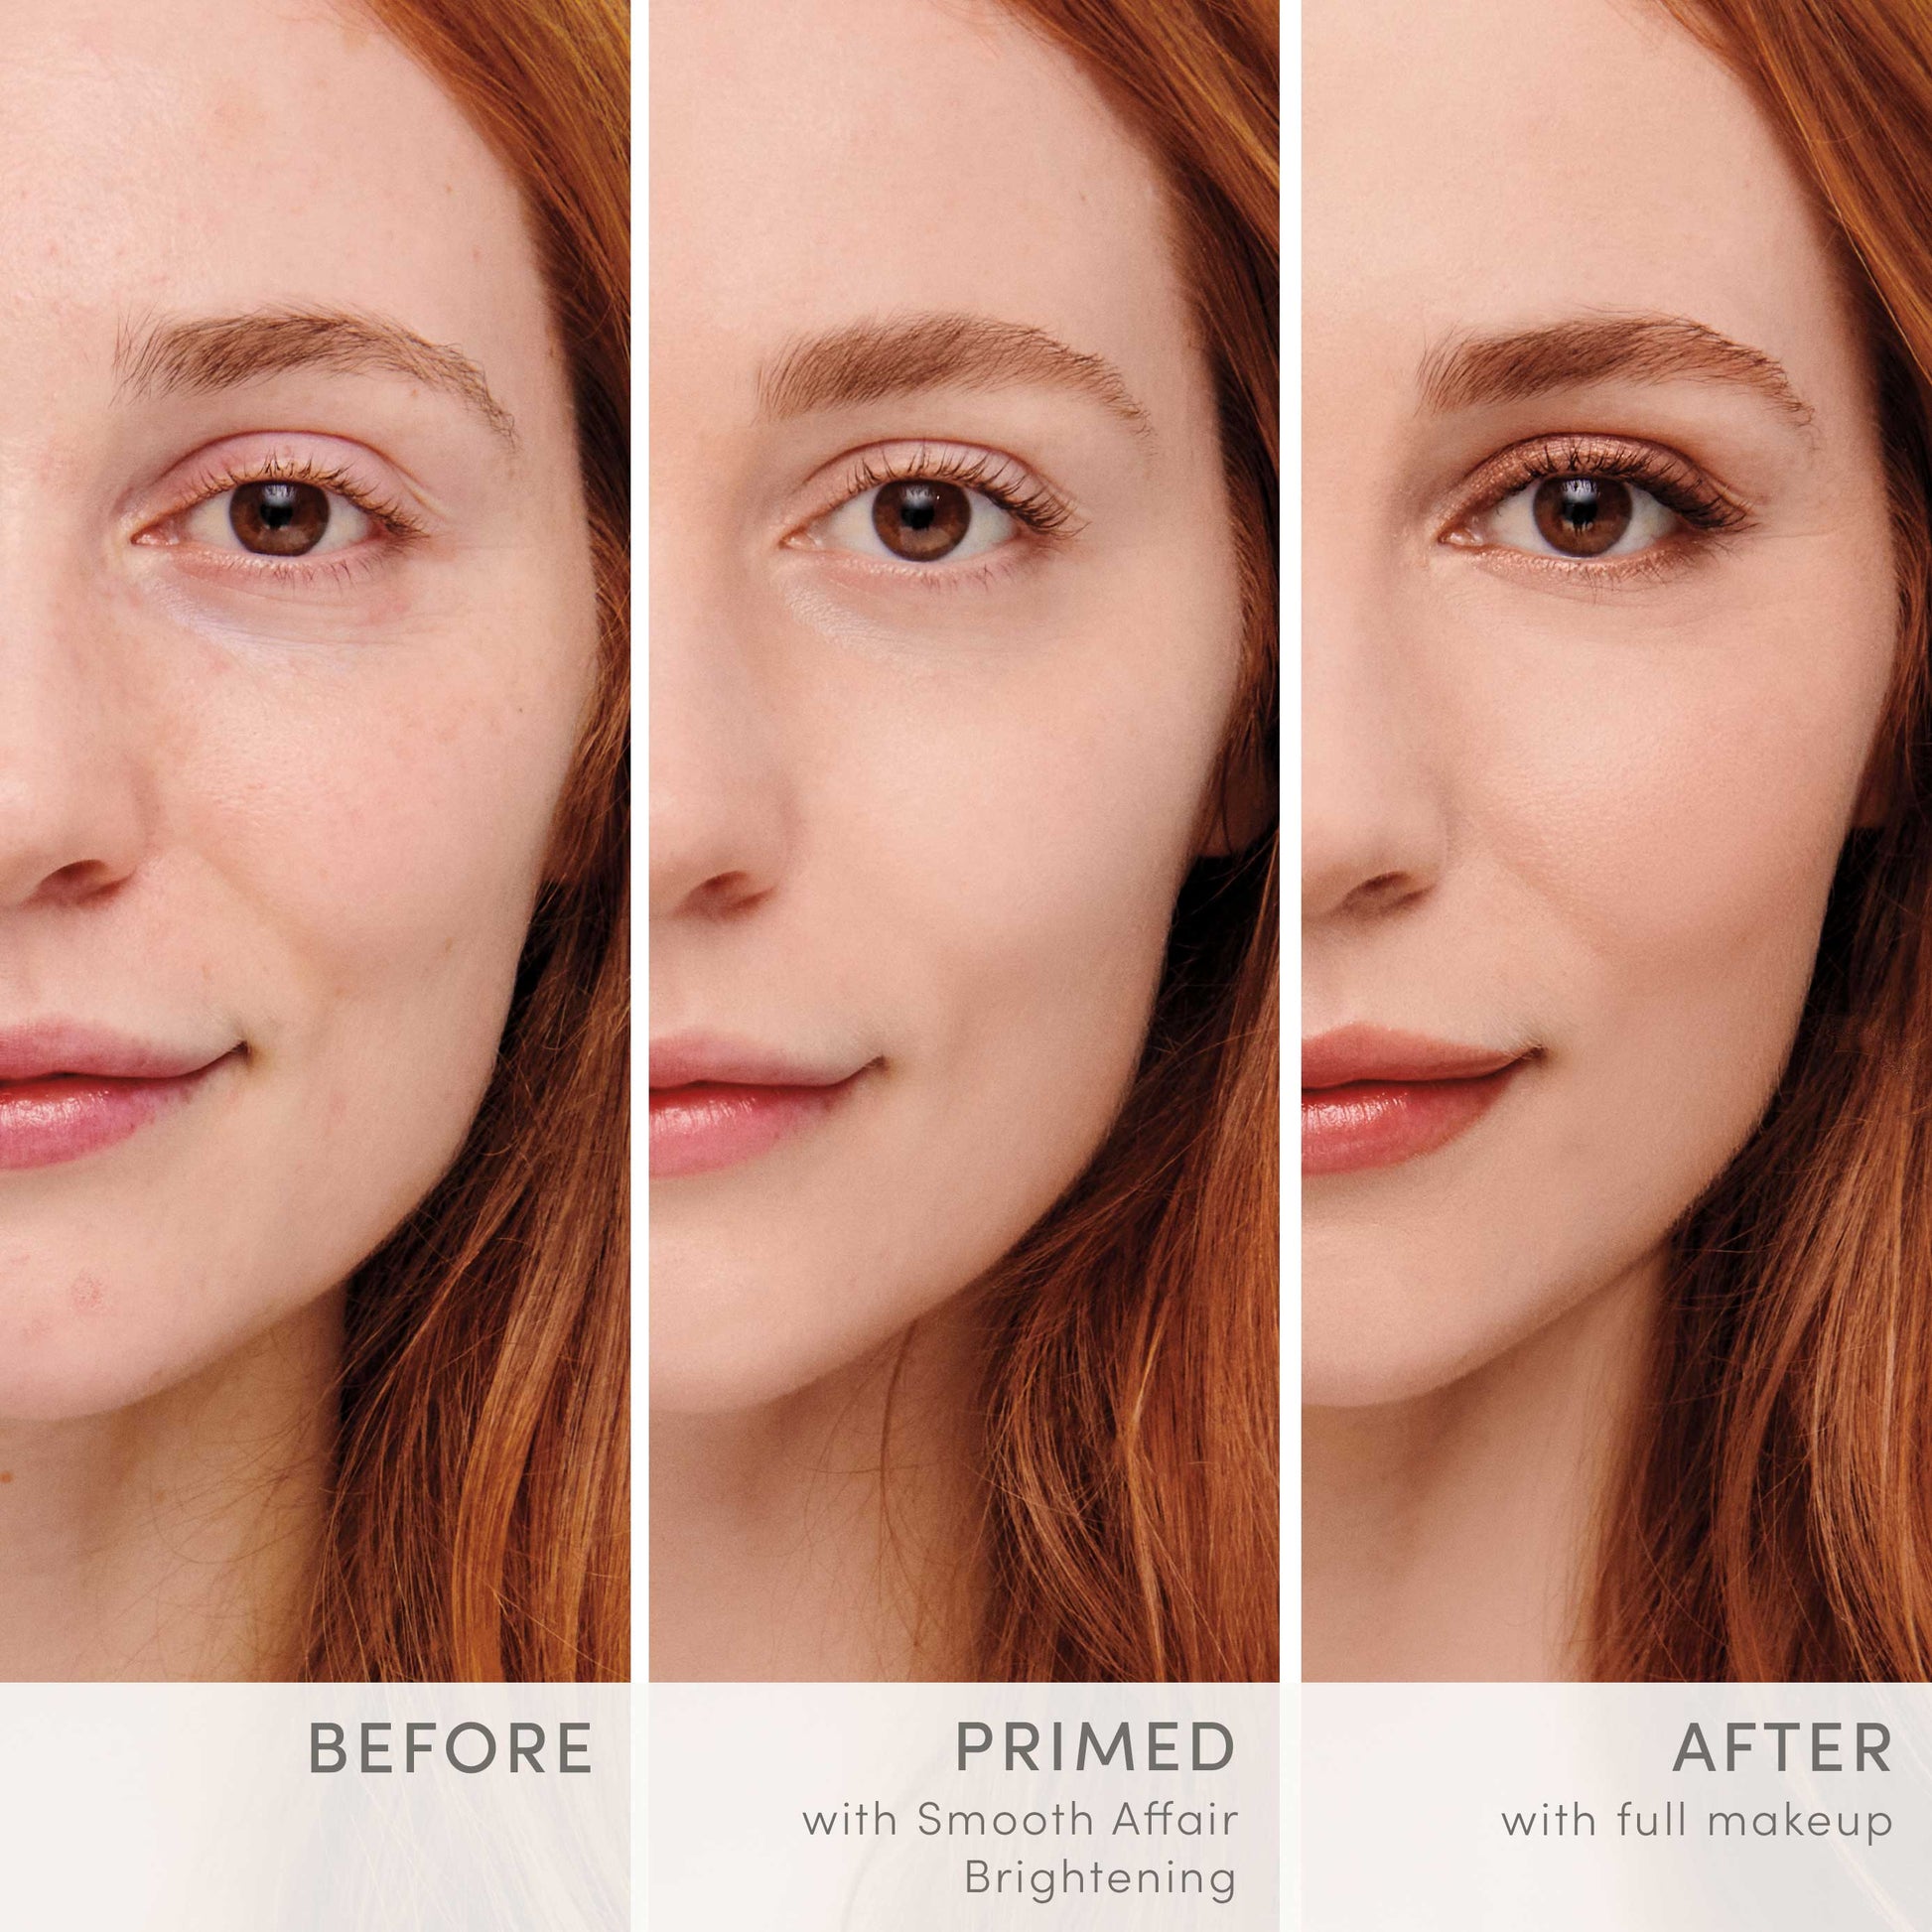 Jane Iredale Brightening Before and After pictures of woman smooth affair